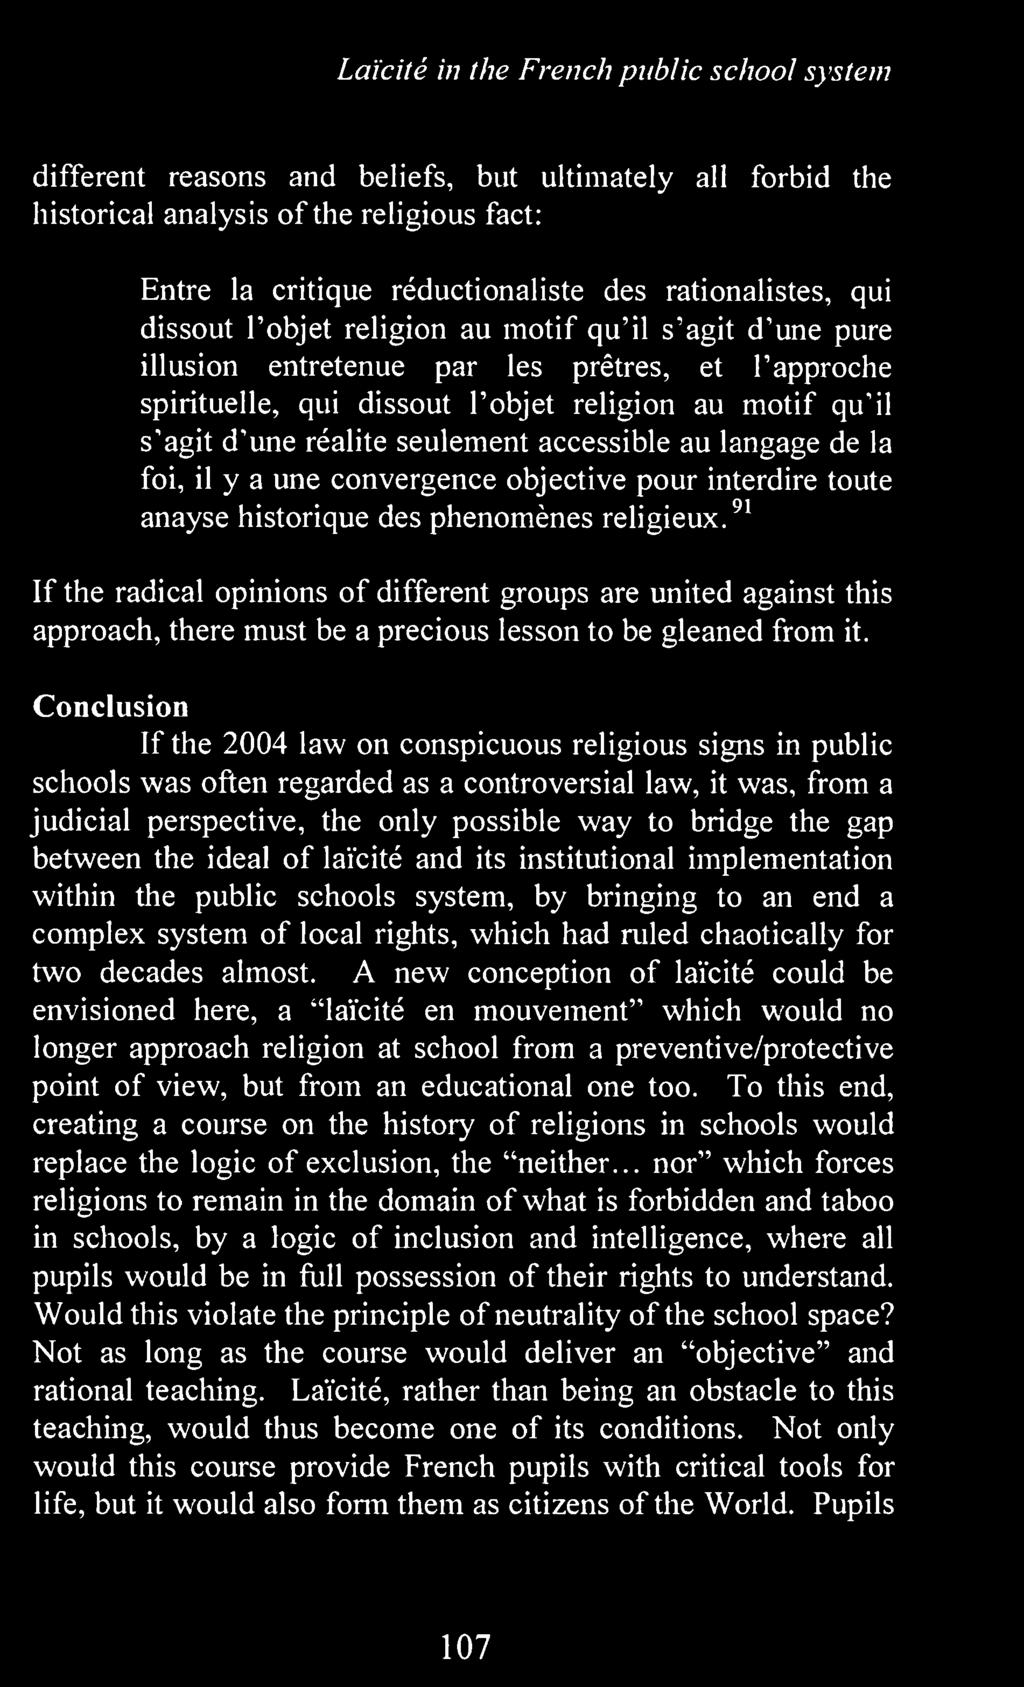 Conclusion If the 2004 law on conspicuous religious signs in public schools was often regarded as a controversial law, it was, from a judicial perspective, the only possible way to bridge the gap